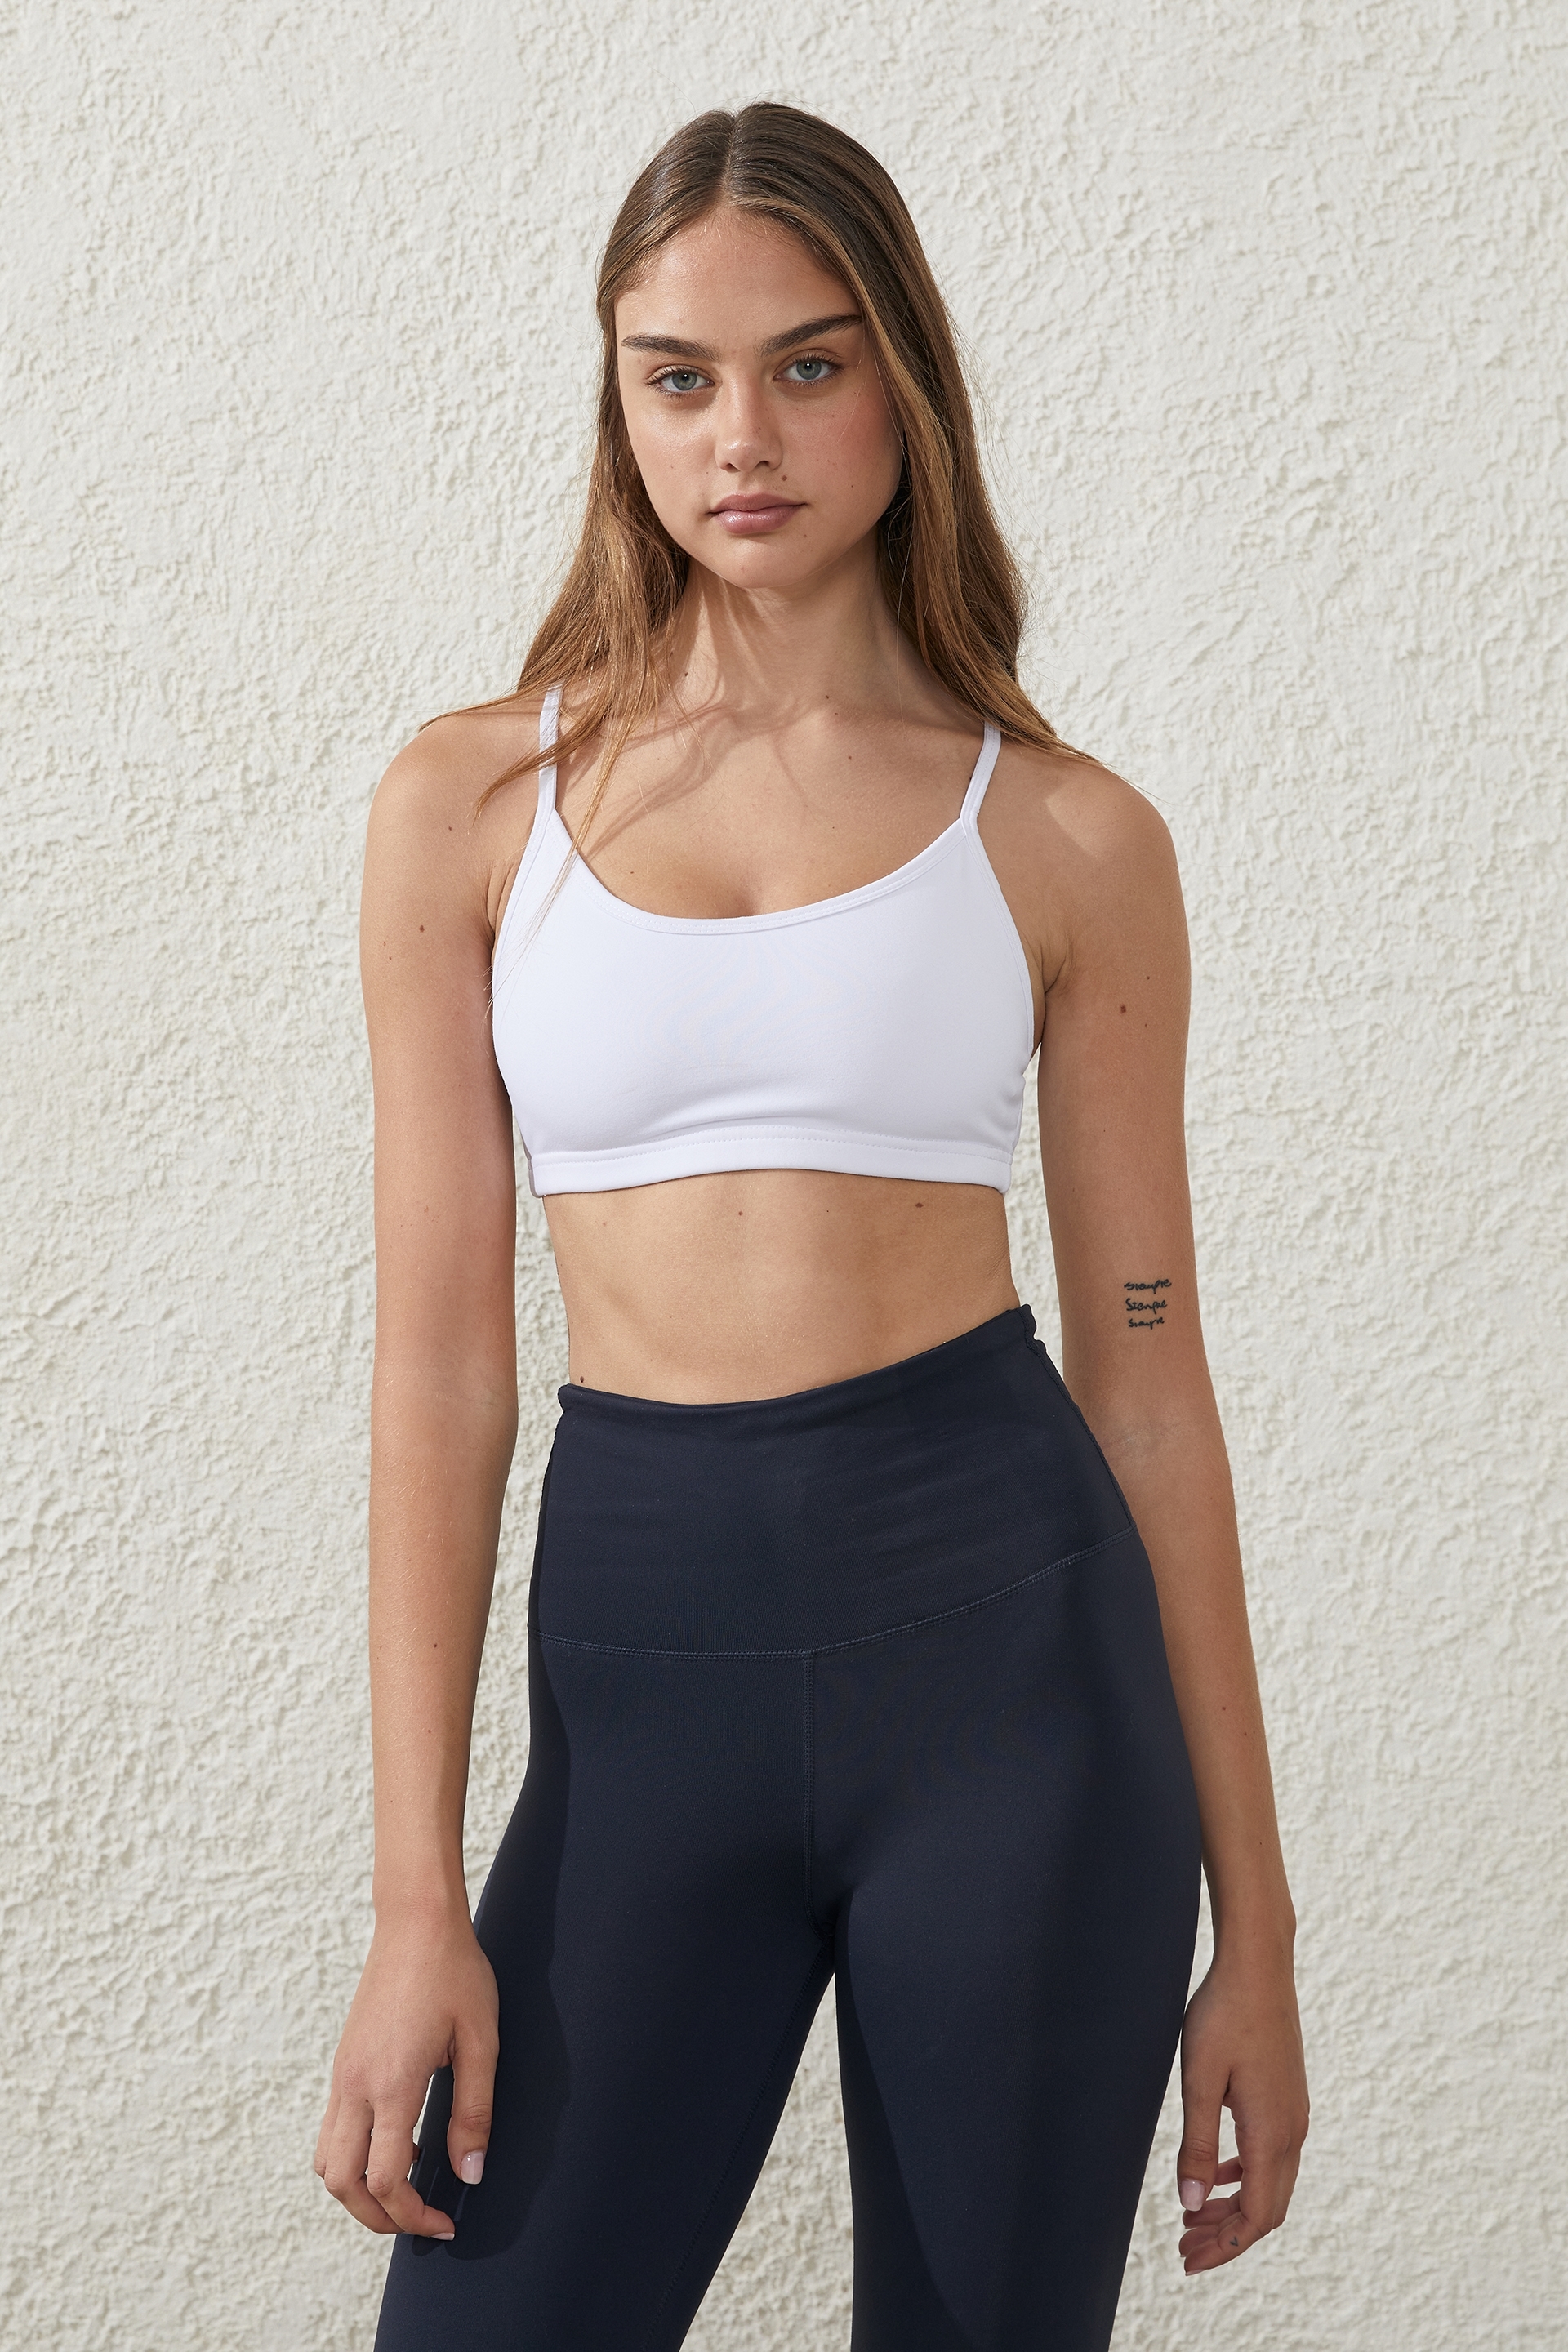 COTTON ON BODY Womens Juniors Workout Cut Out Crop Sports Bra White M